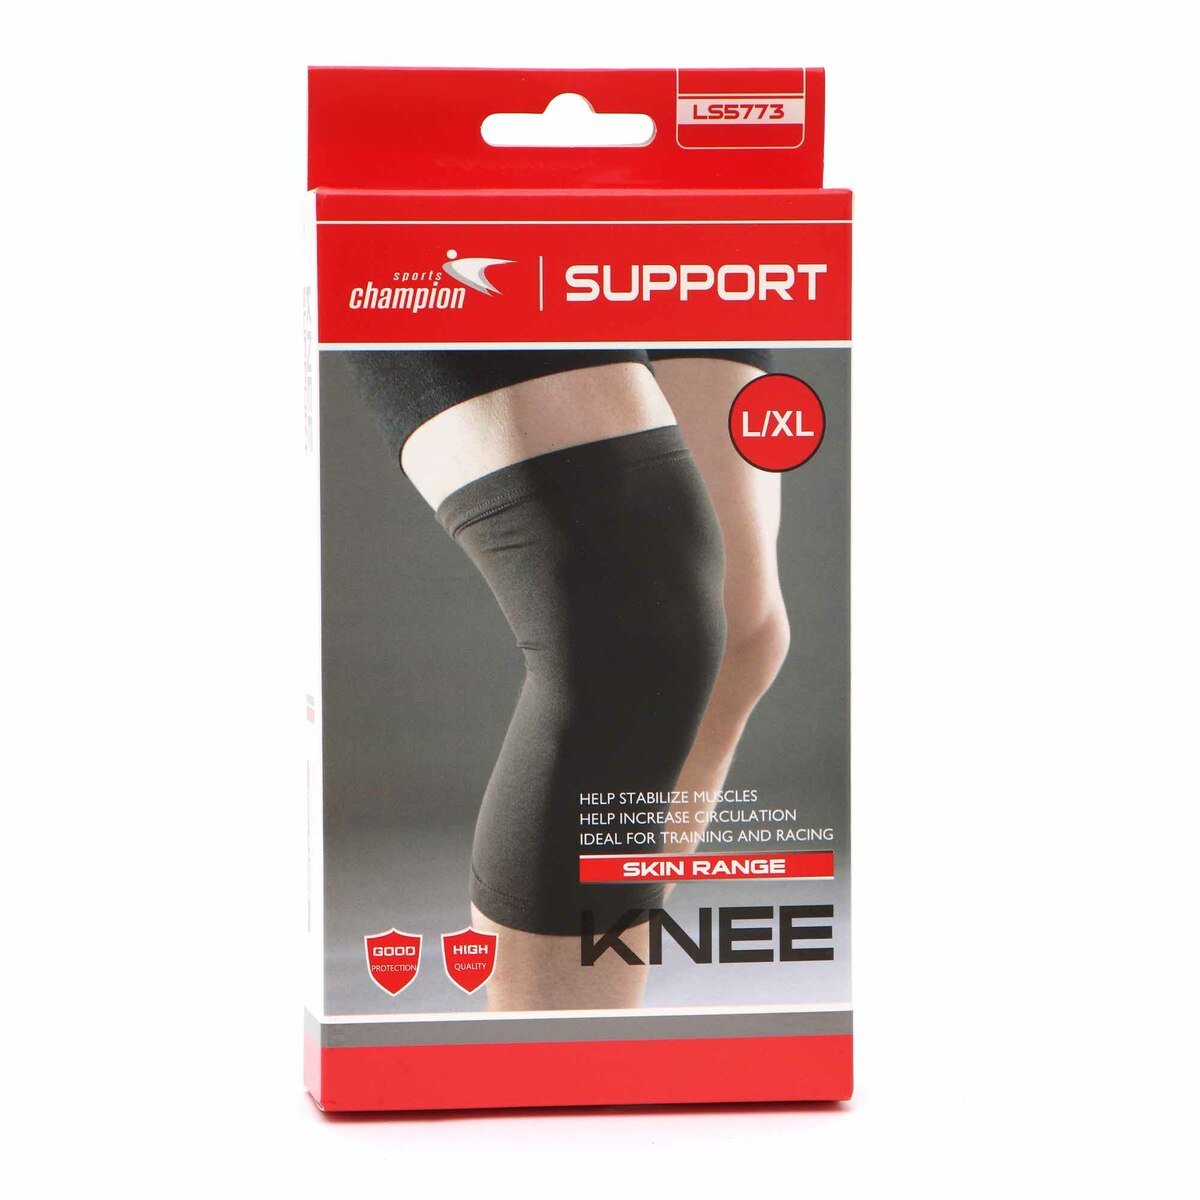 Sports Champion Knee Support LS5773 Large